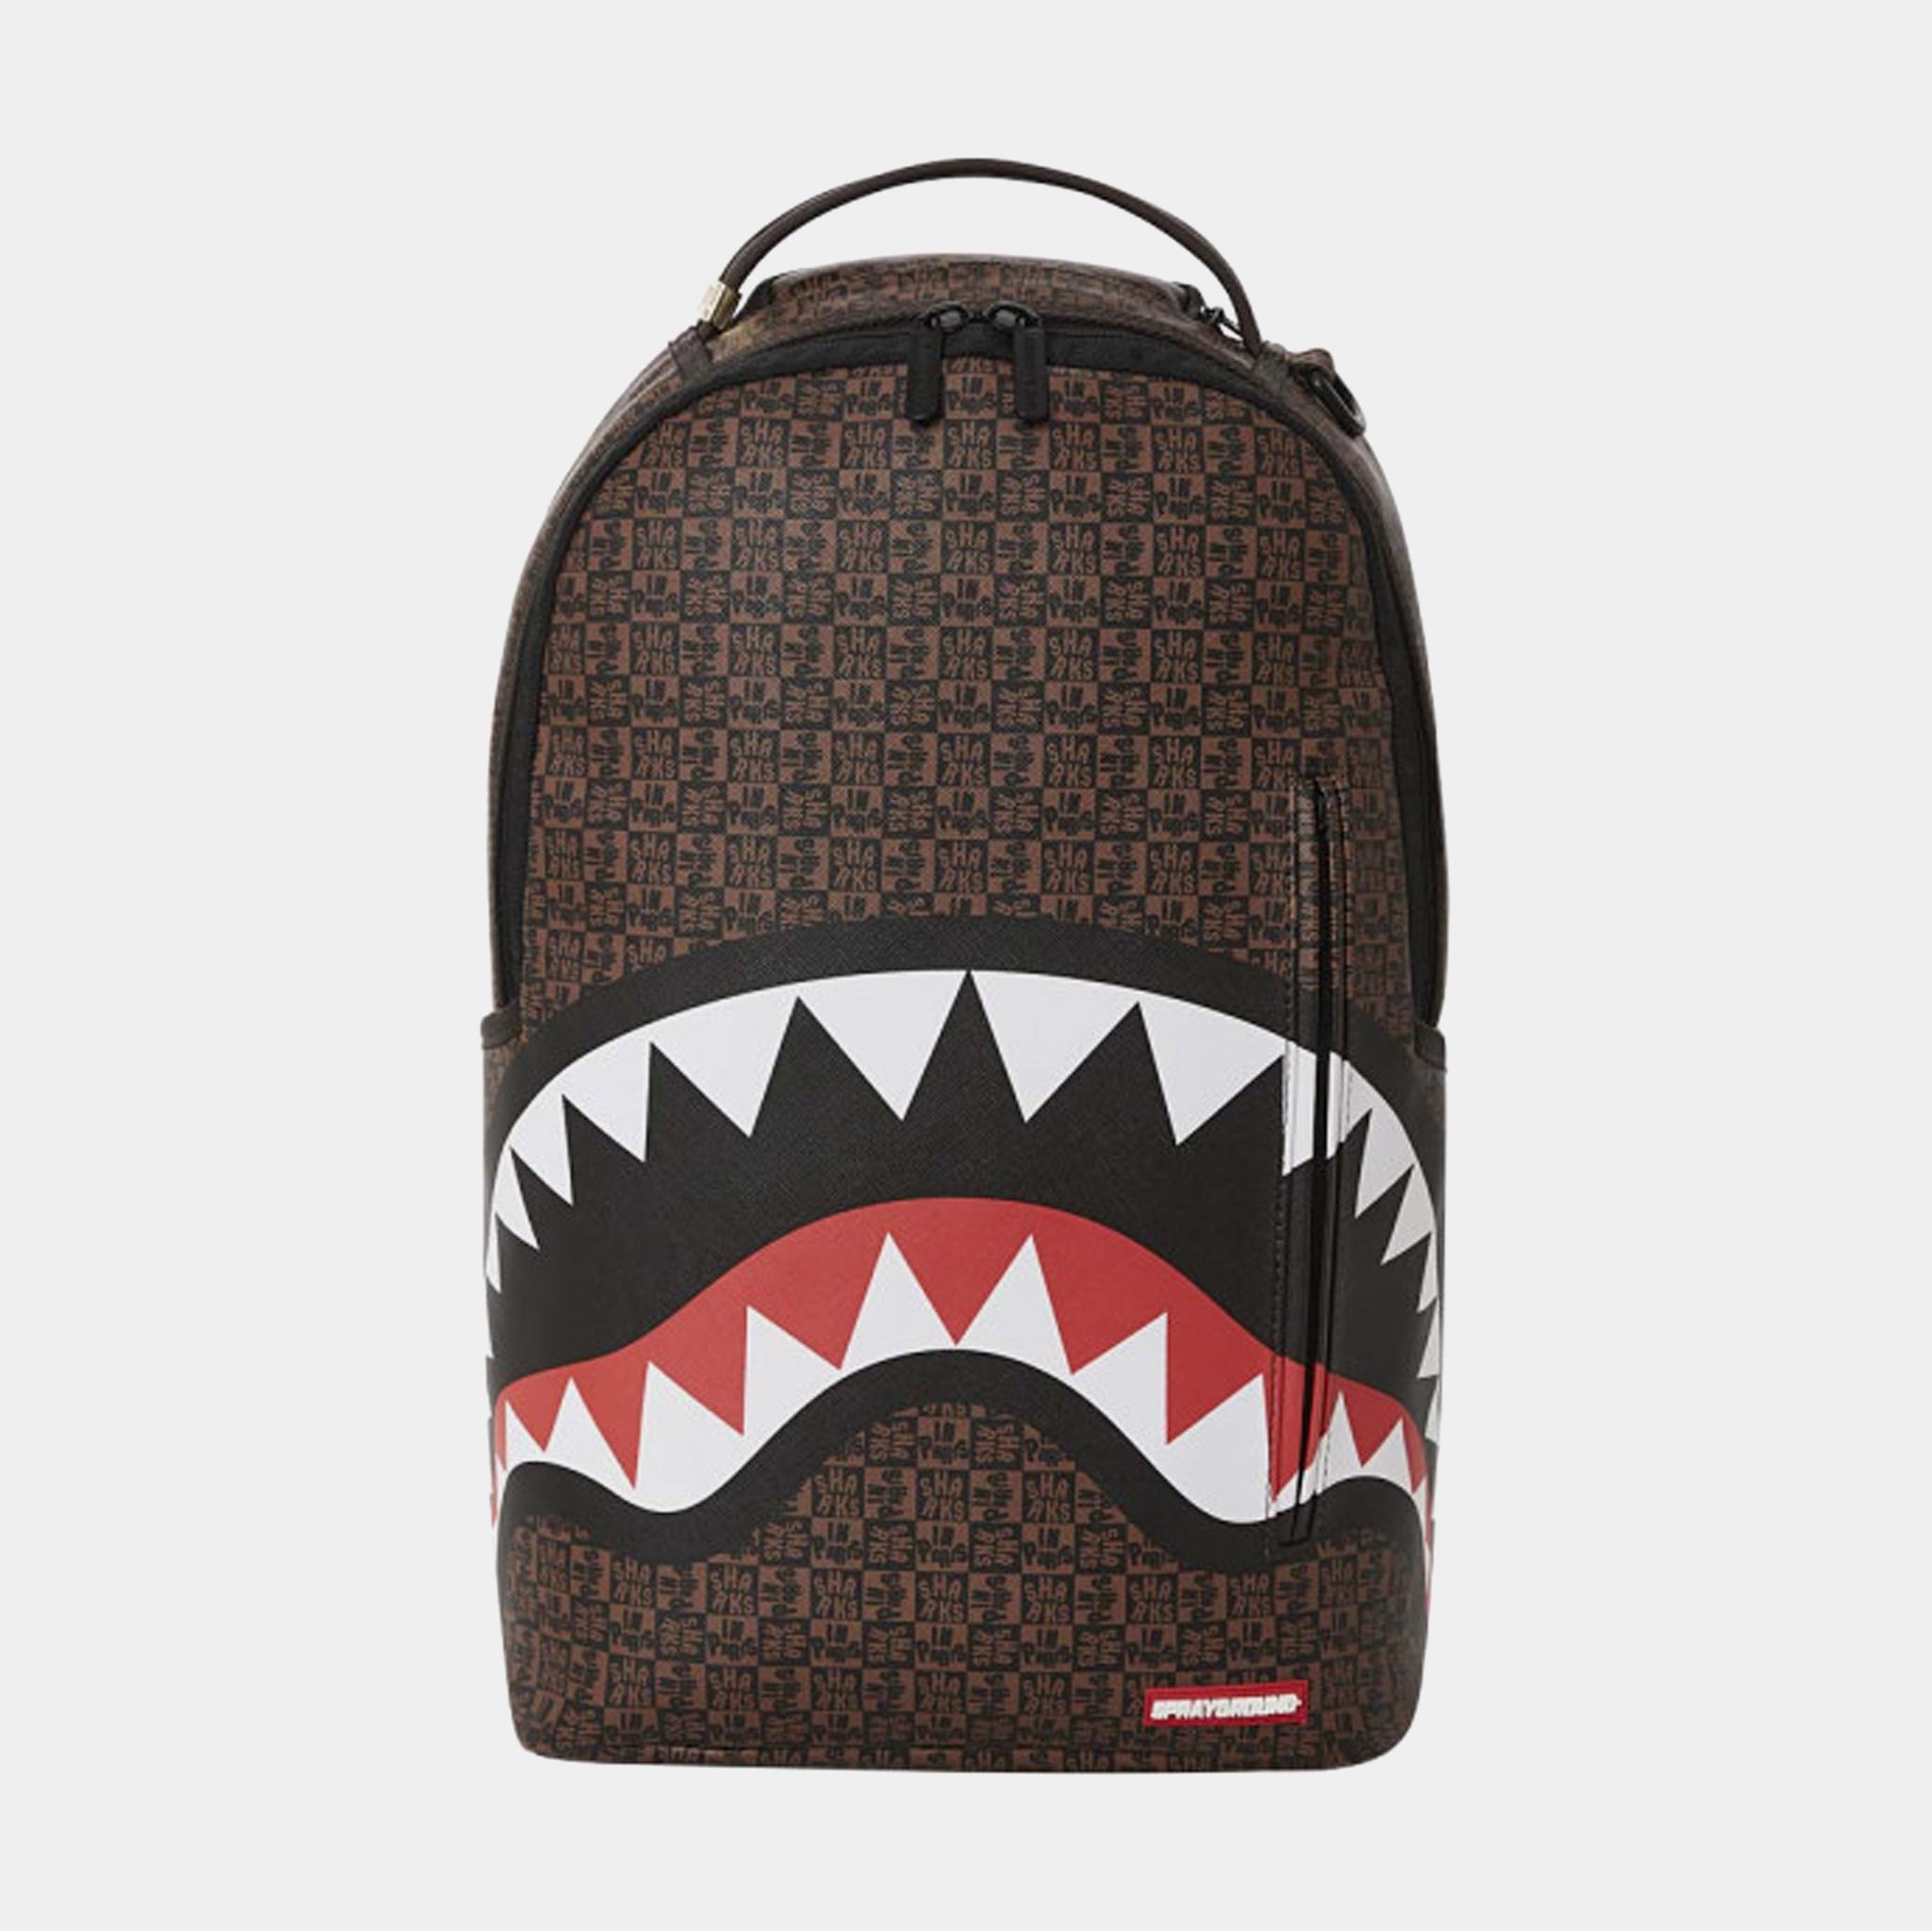 Sprayground Sharks In Paris Check Backpack in Brown for Men